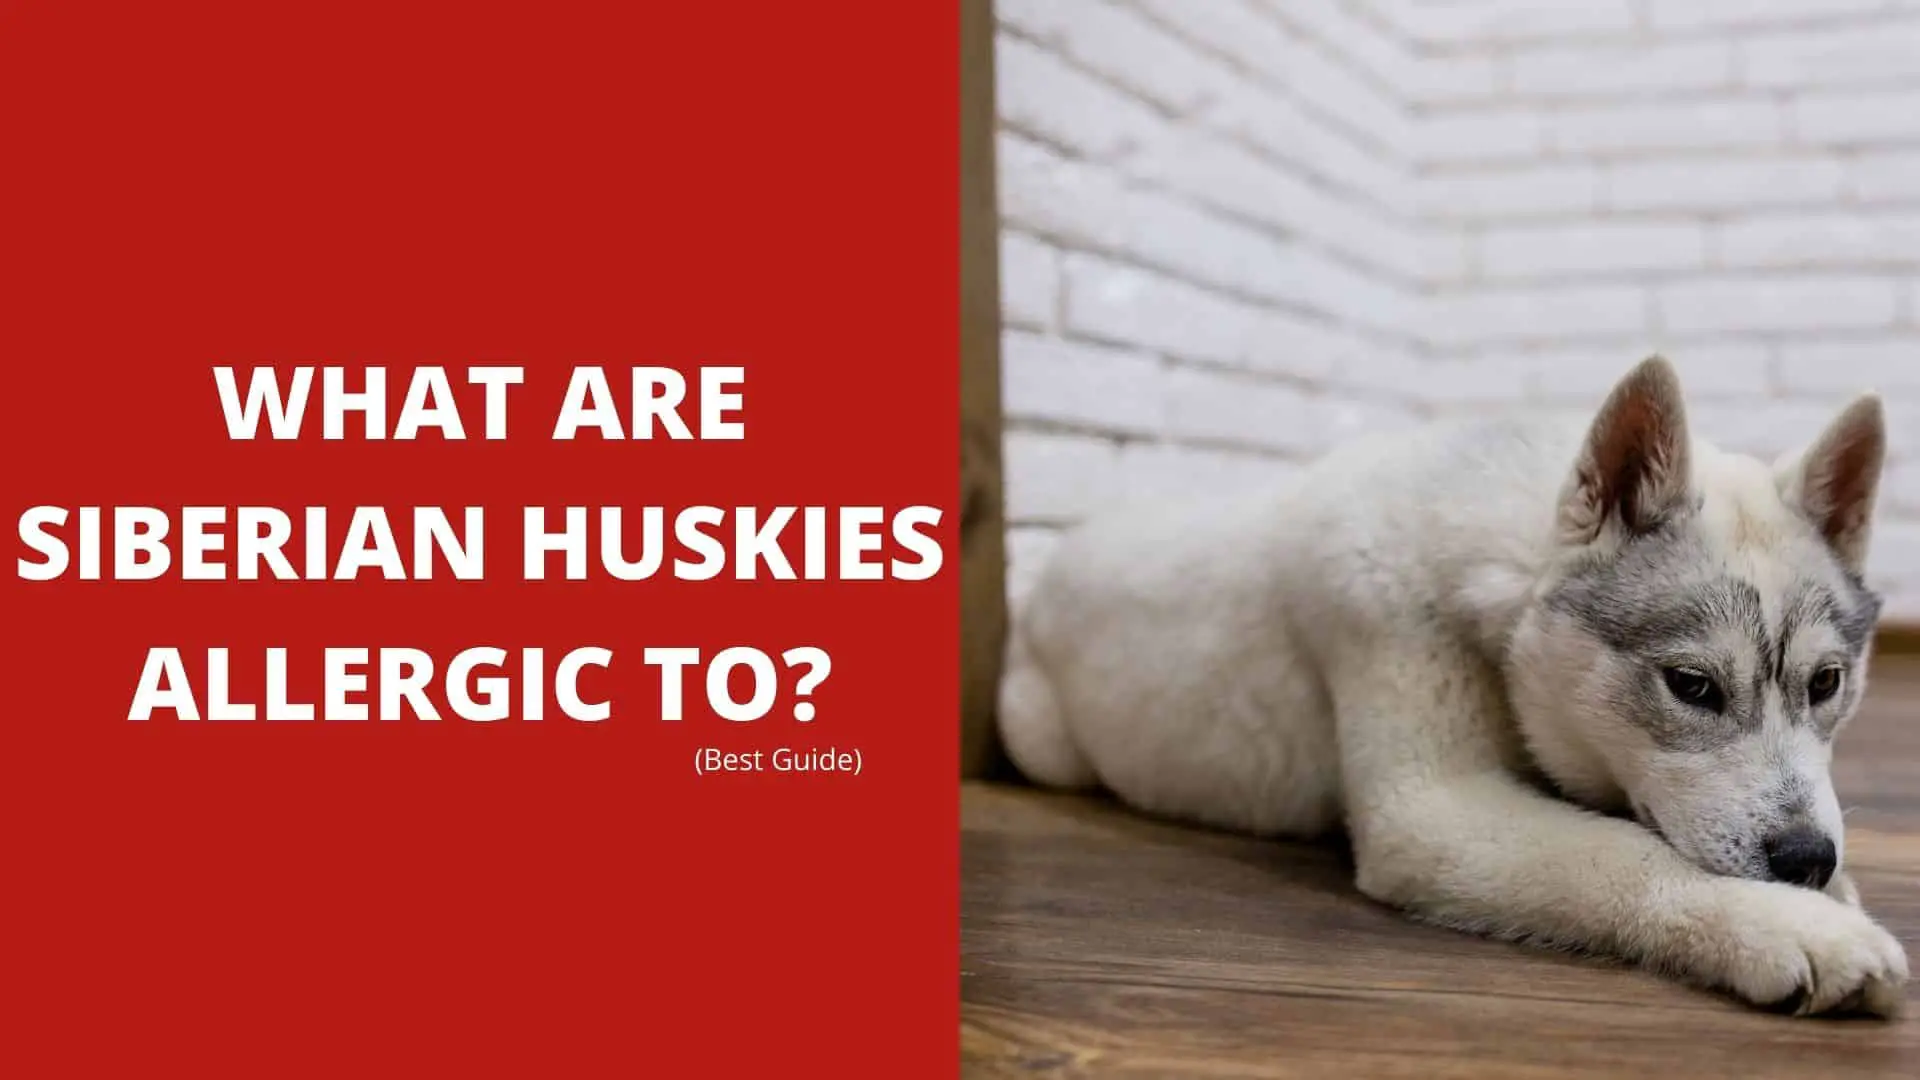 What Are Siberian Huskies Allergic To? – Best Guide 2022